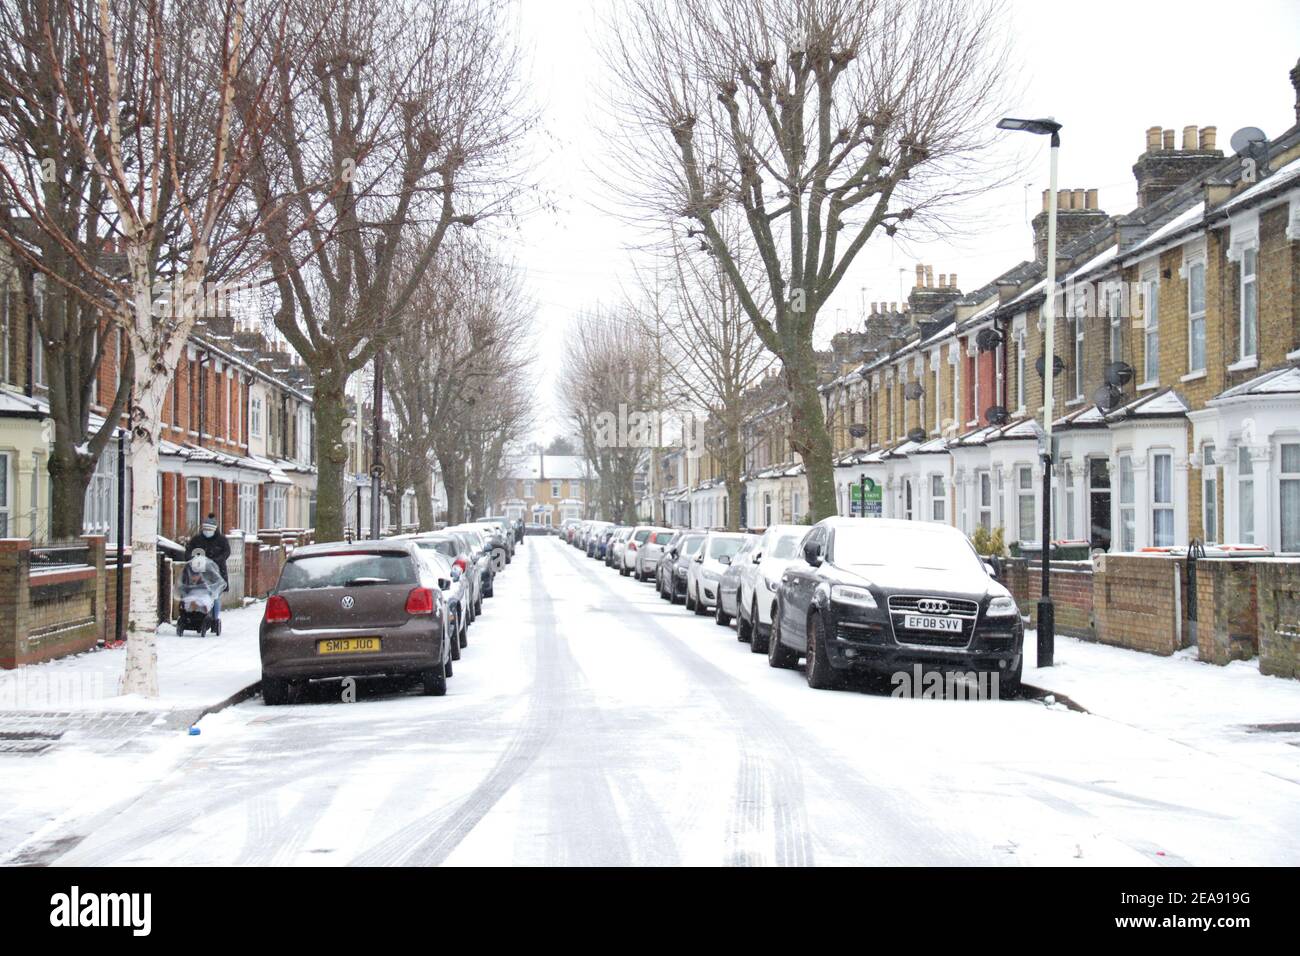 A view of a snow covered street in East London following a heavy snowfall caused by Storm Darcy. Heavy snow and ice has brought disruption to parts of the UK, with London receiving around 5cm of snow. Storm Darcy's strong easterly winds have plummeted temperatures in parts of the UK to below minus one. Stock Photo